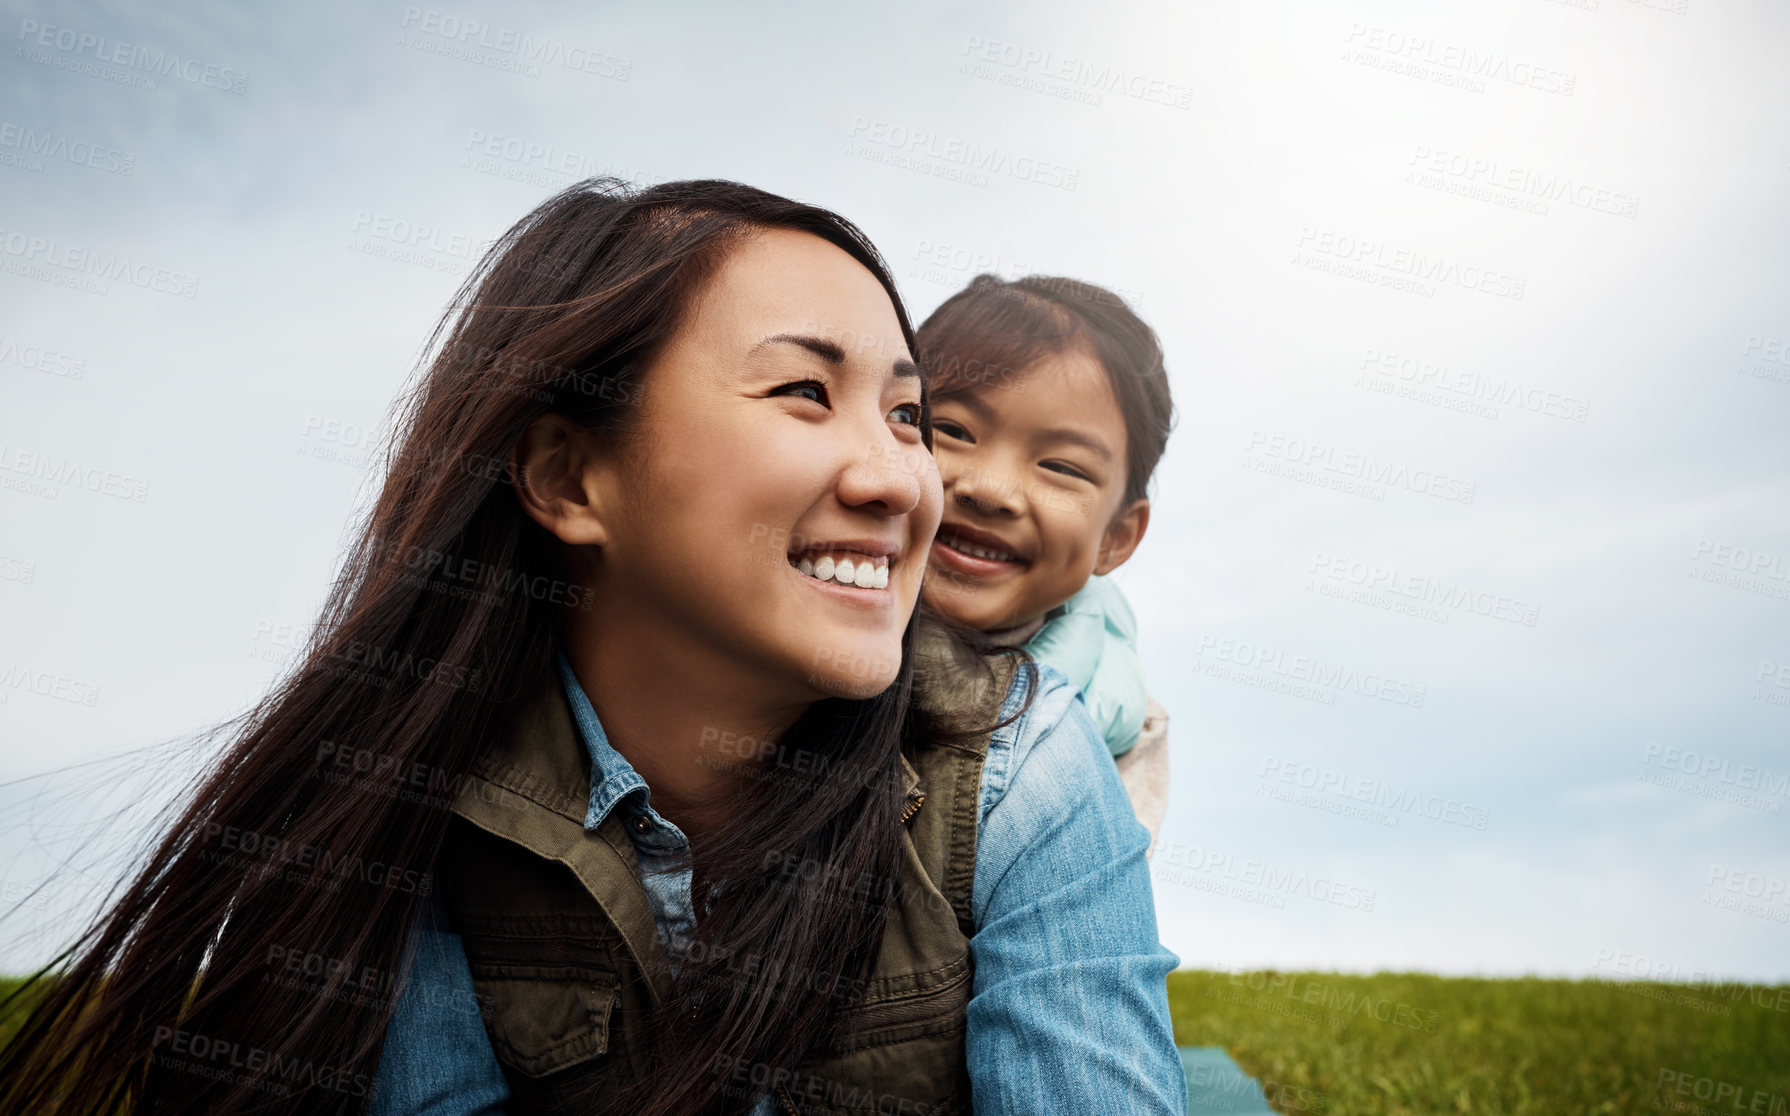 Buy stock photo Shot of a mother bonding with her little daughter outdoors